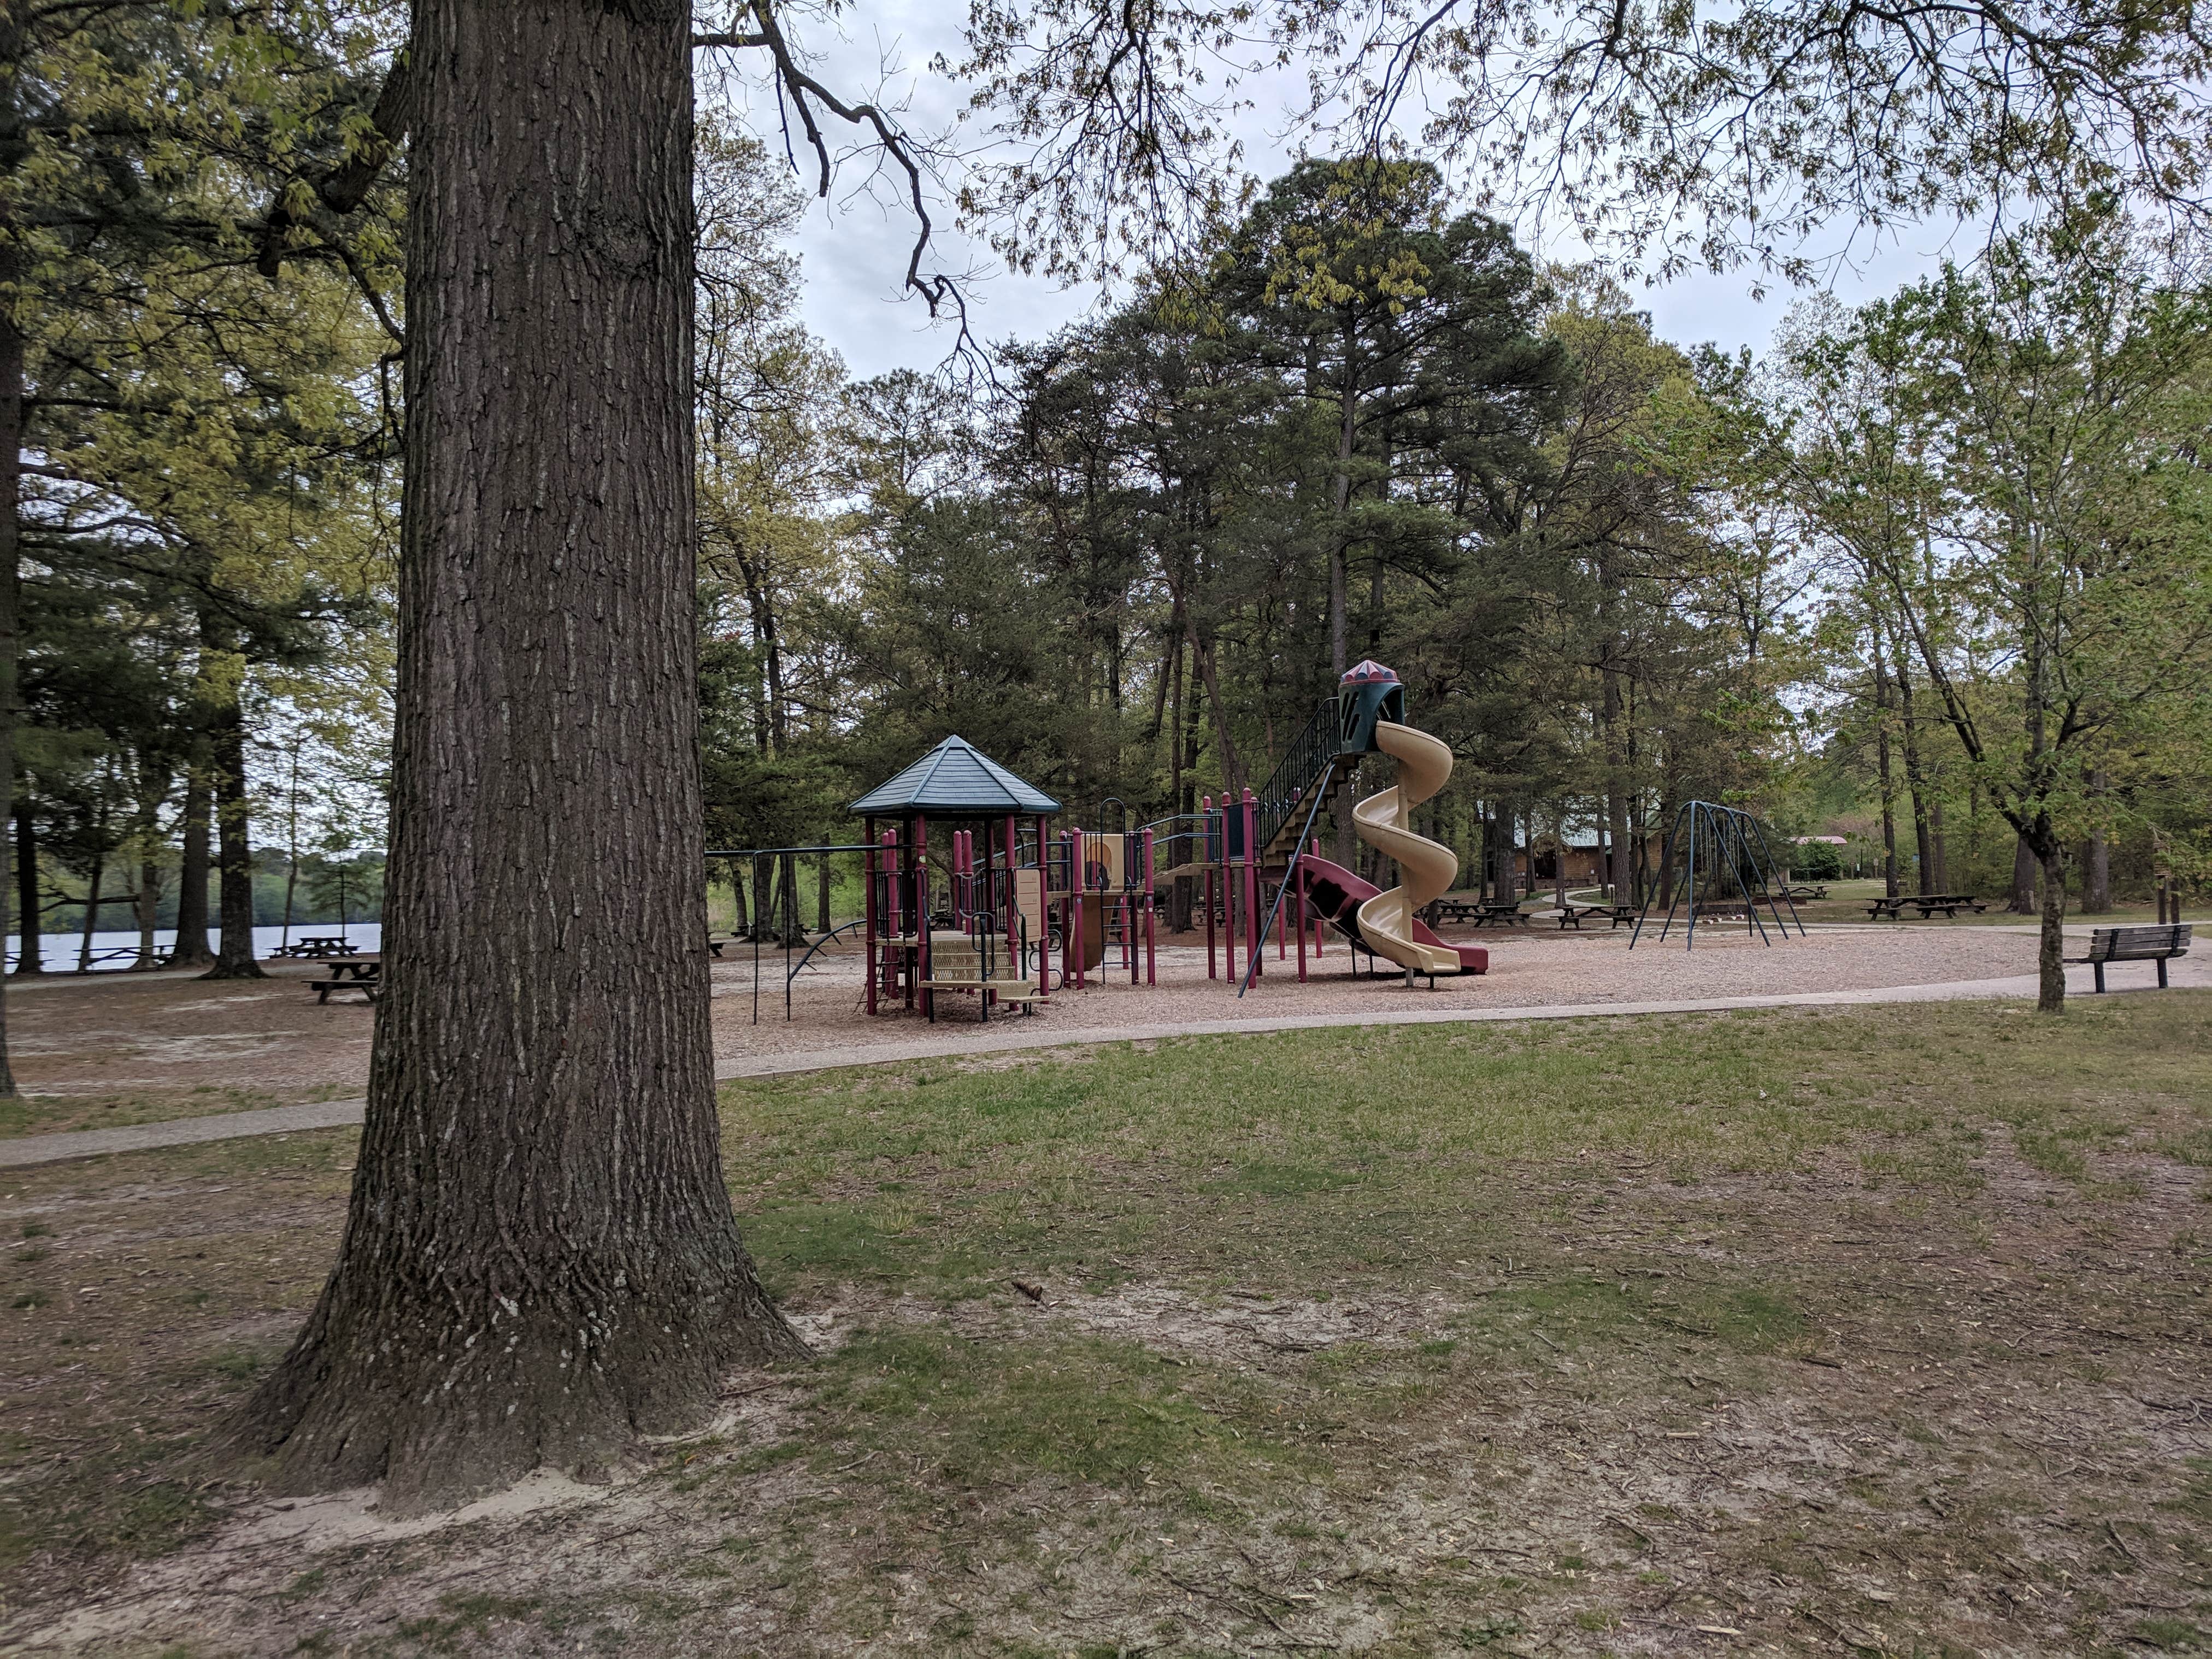 One of two park playground areas